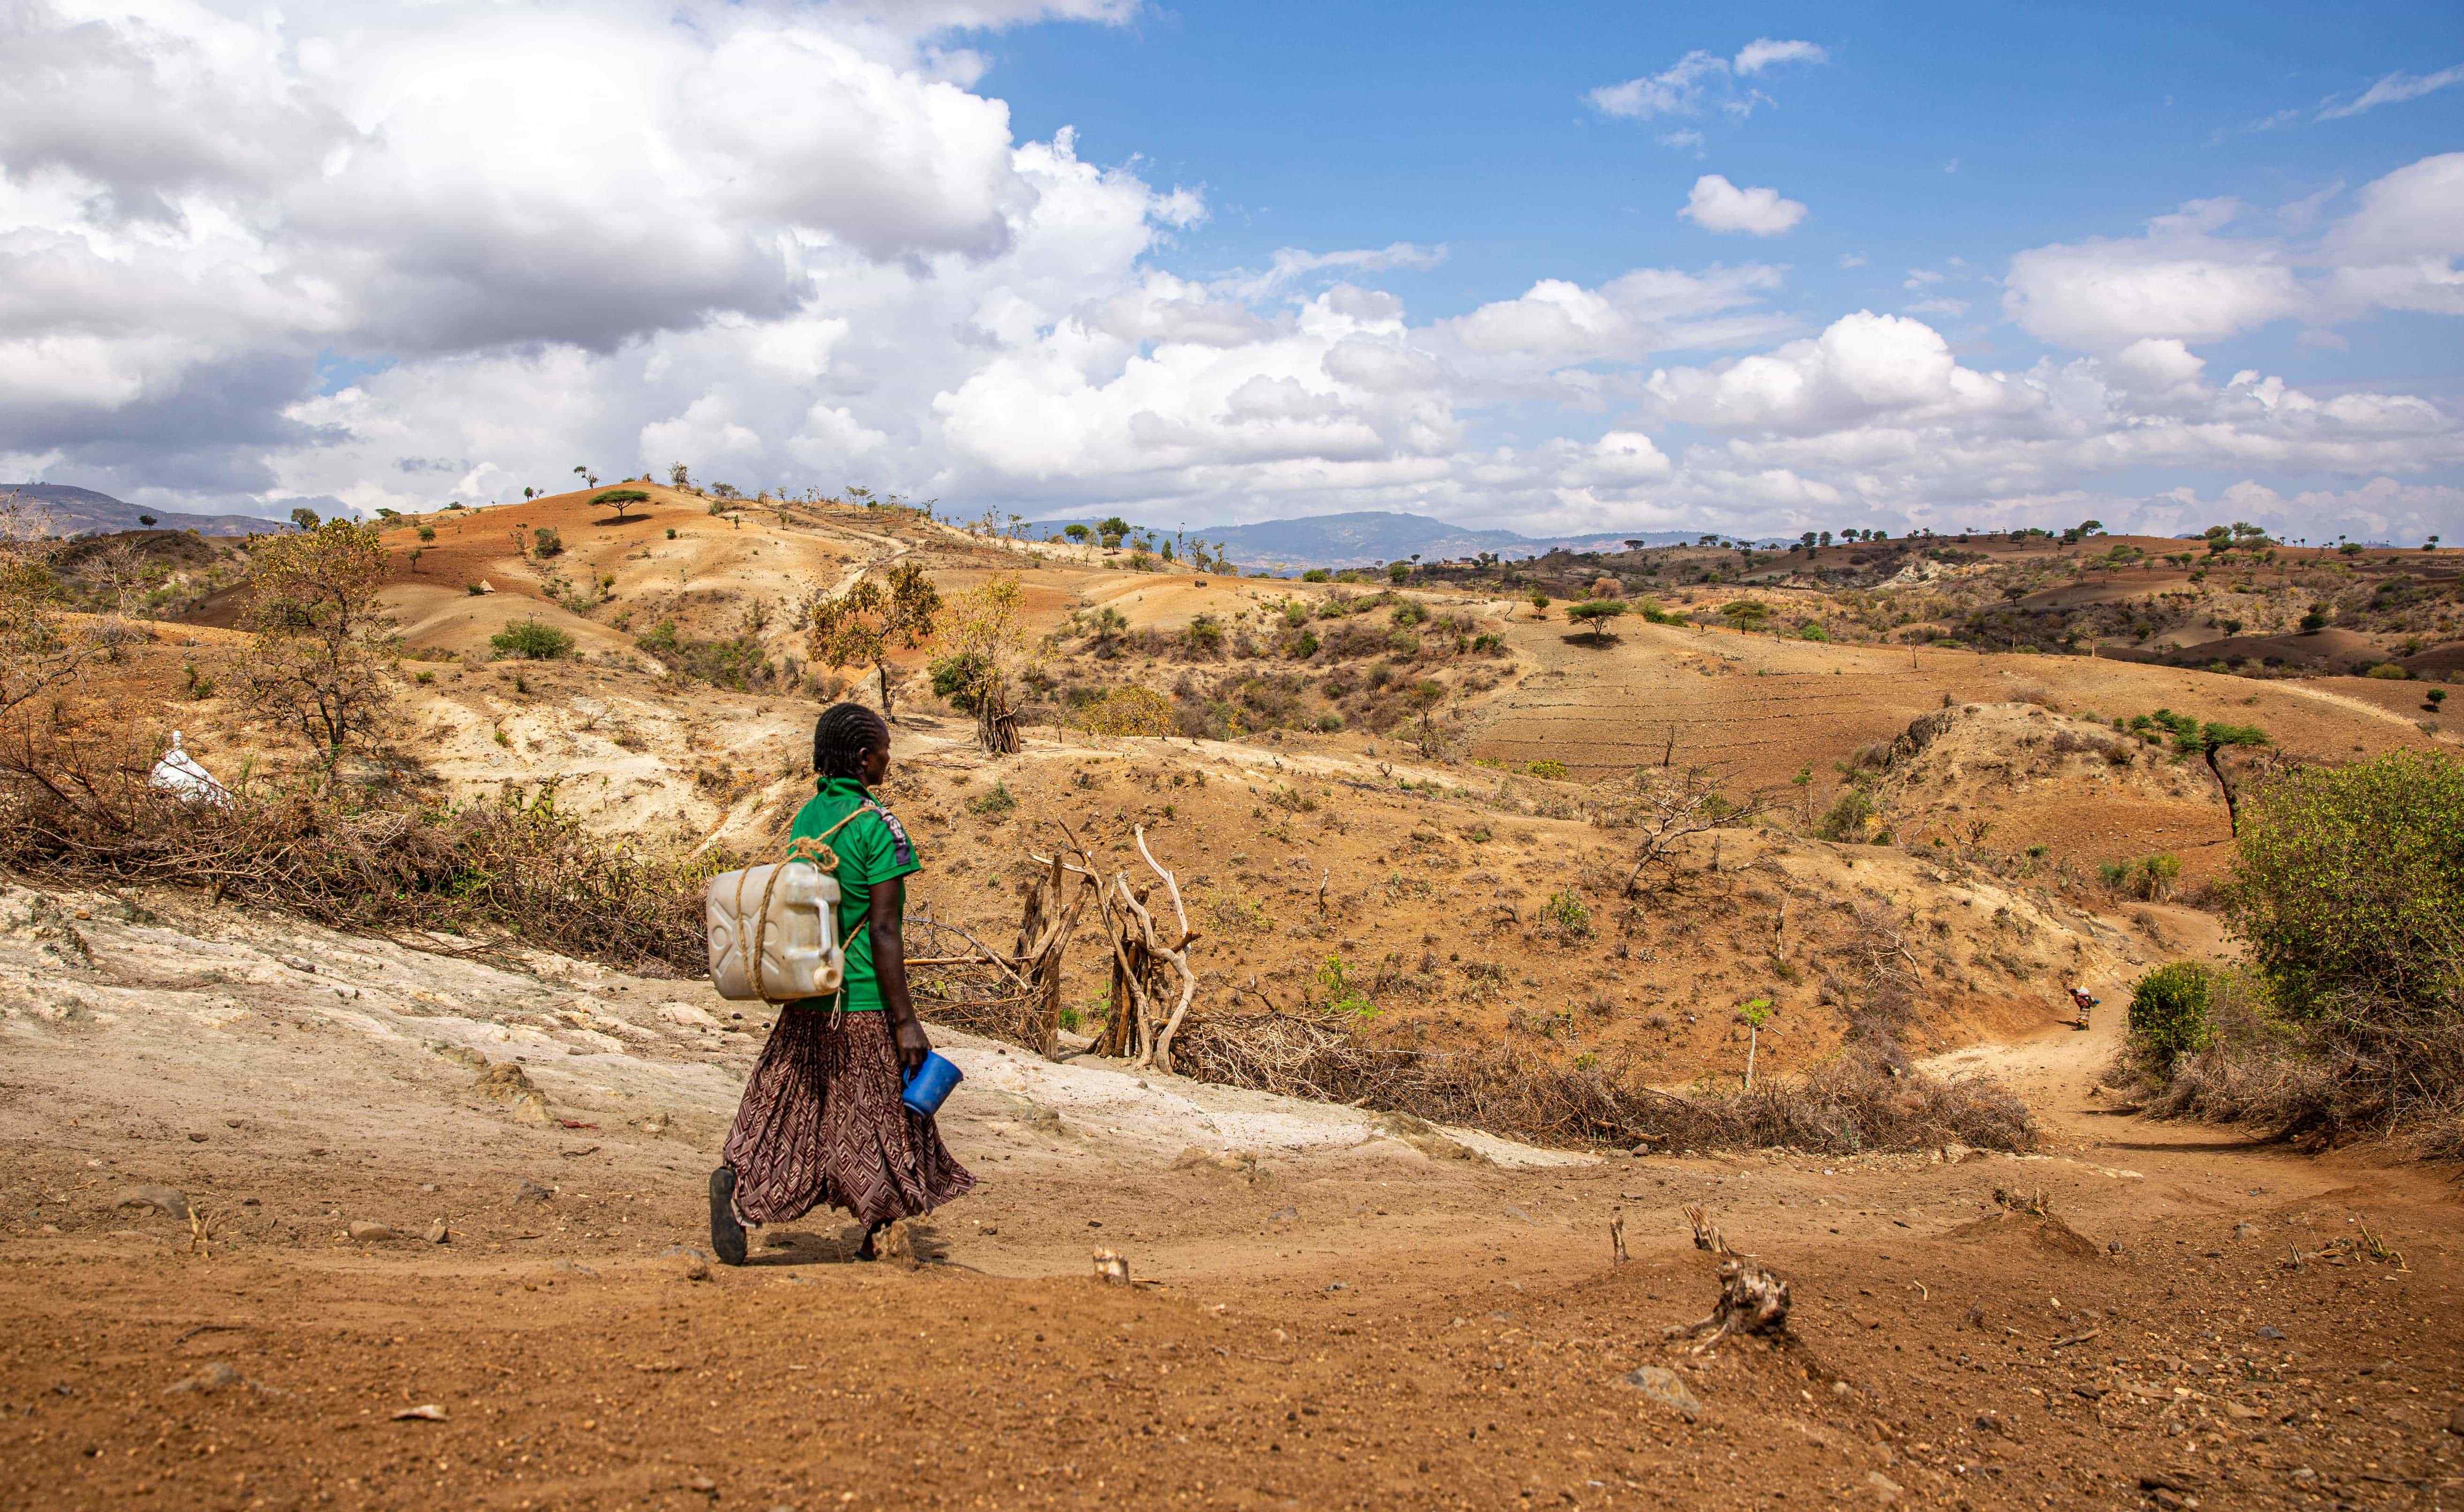 Makito walking 3 kilometers to fetch water for her family. While conflict forced Makito and her family to flee for their lives empty-handed, it’s climate change that’s kept her from being able to rebuild her life without access to the water and resources she needs to start farming again. 